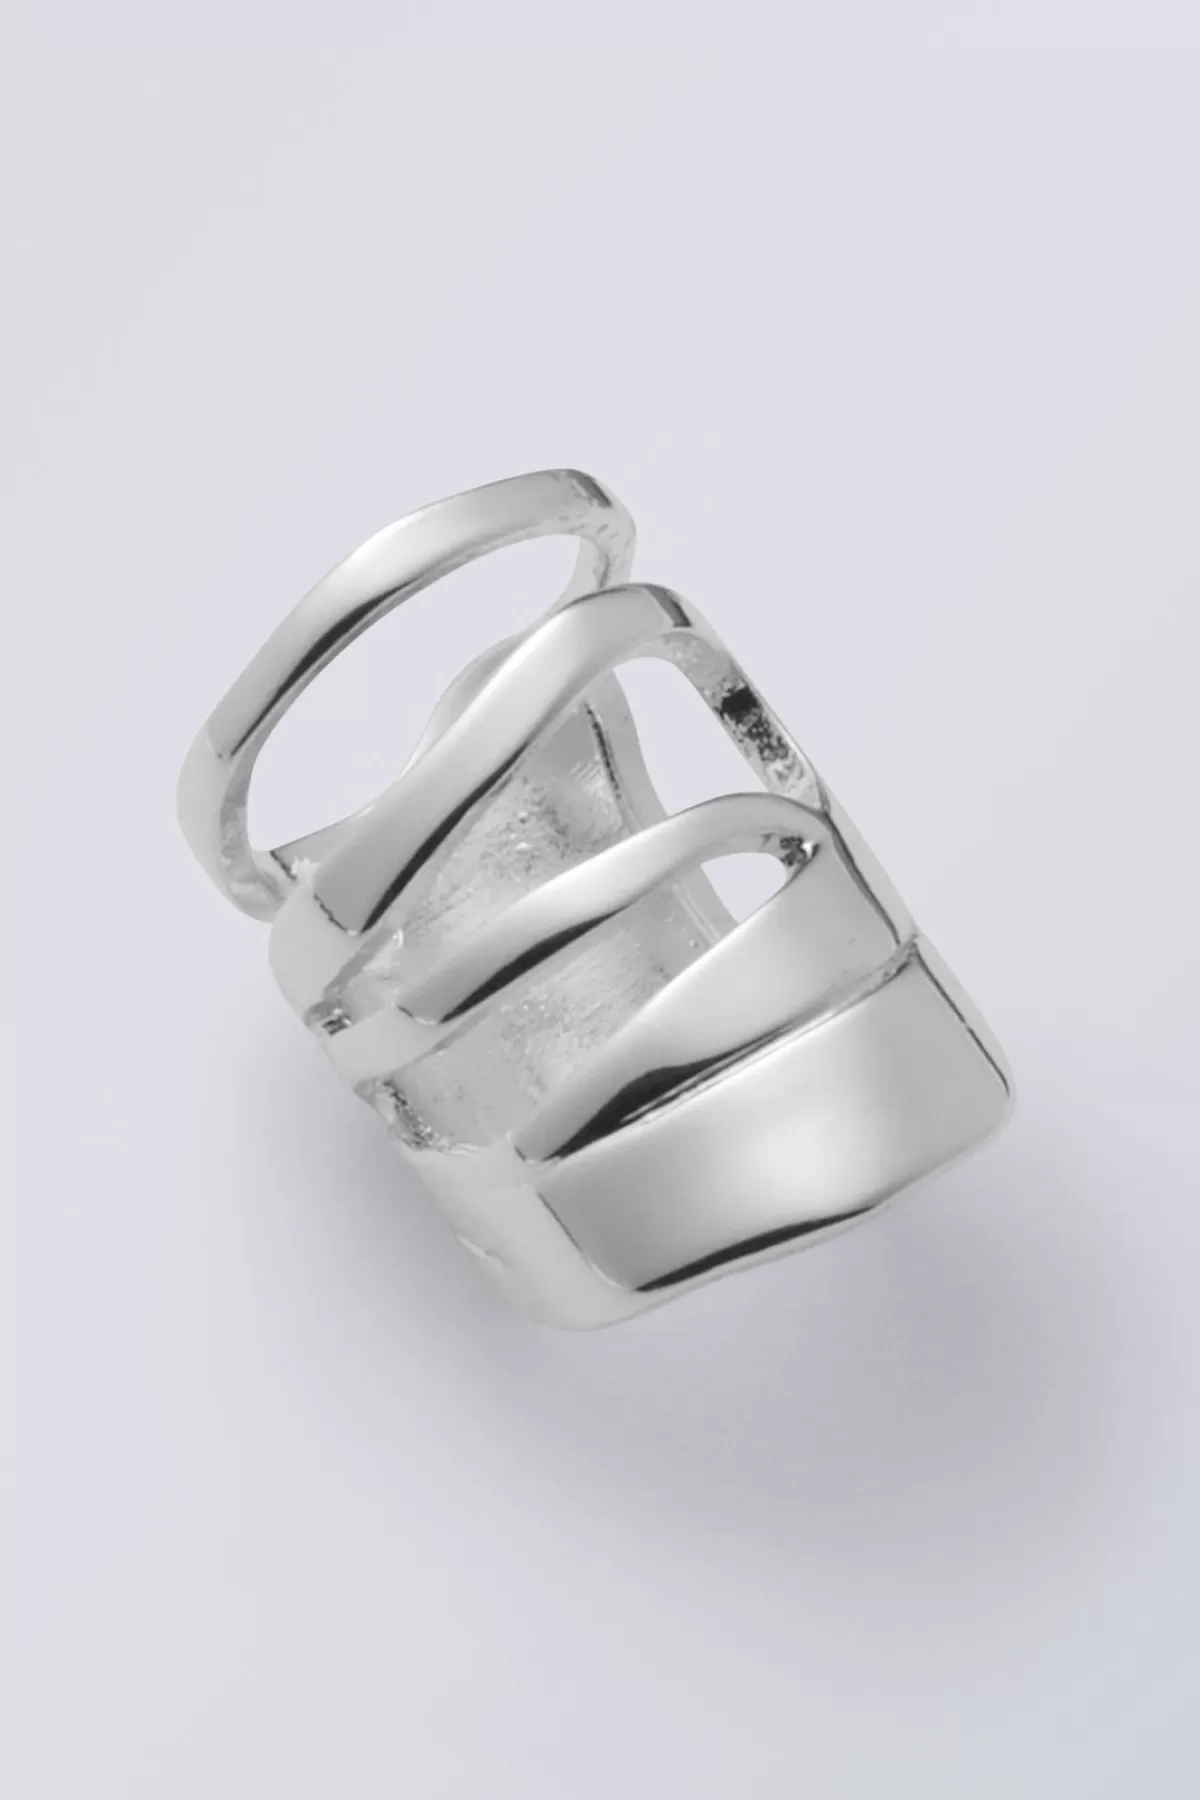 Weekday Motion Ring Silver Online